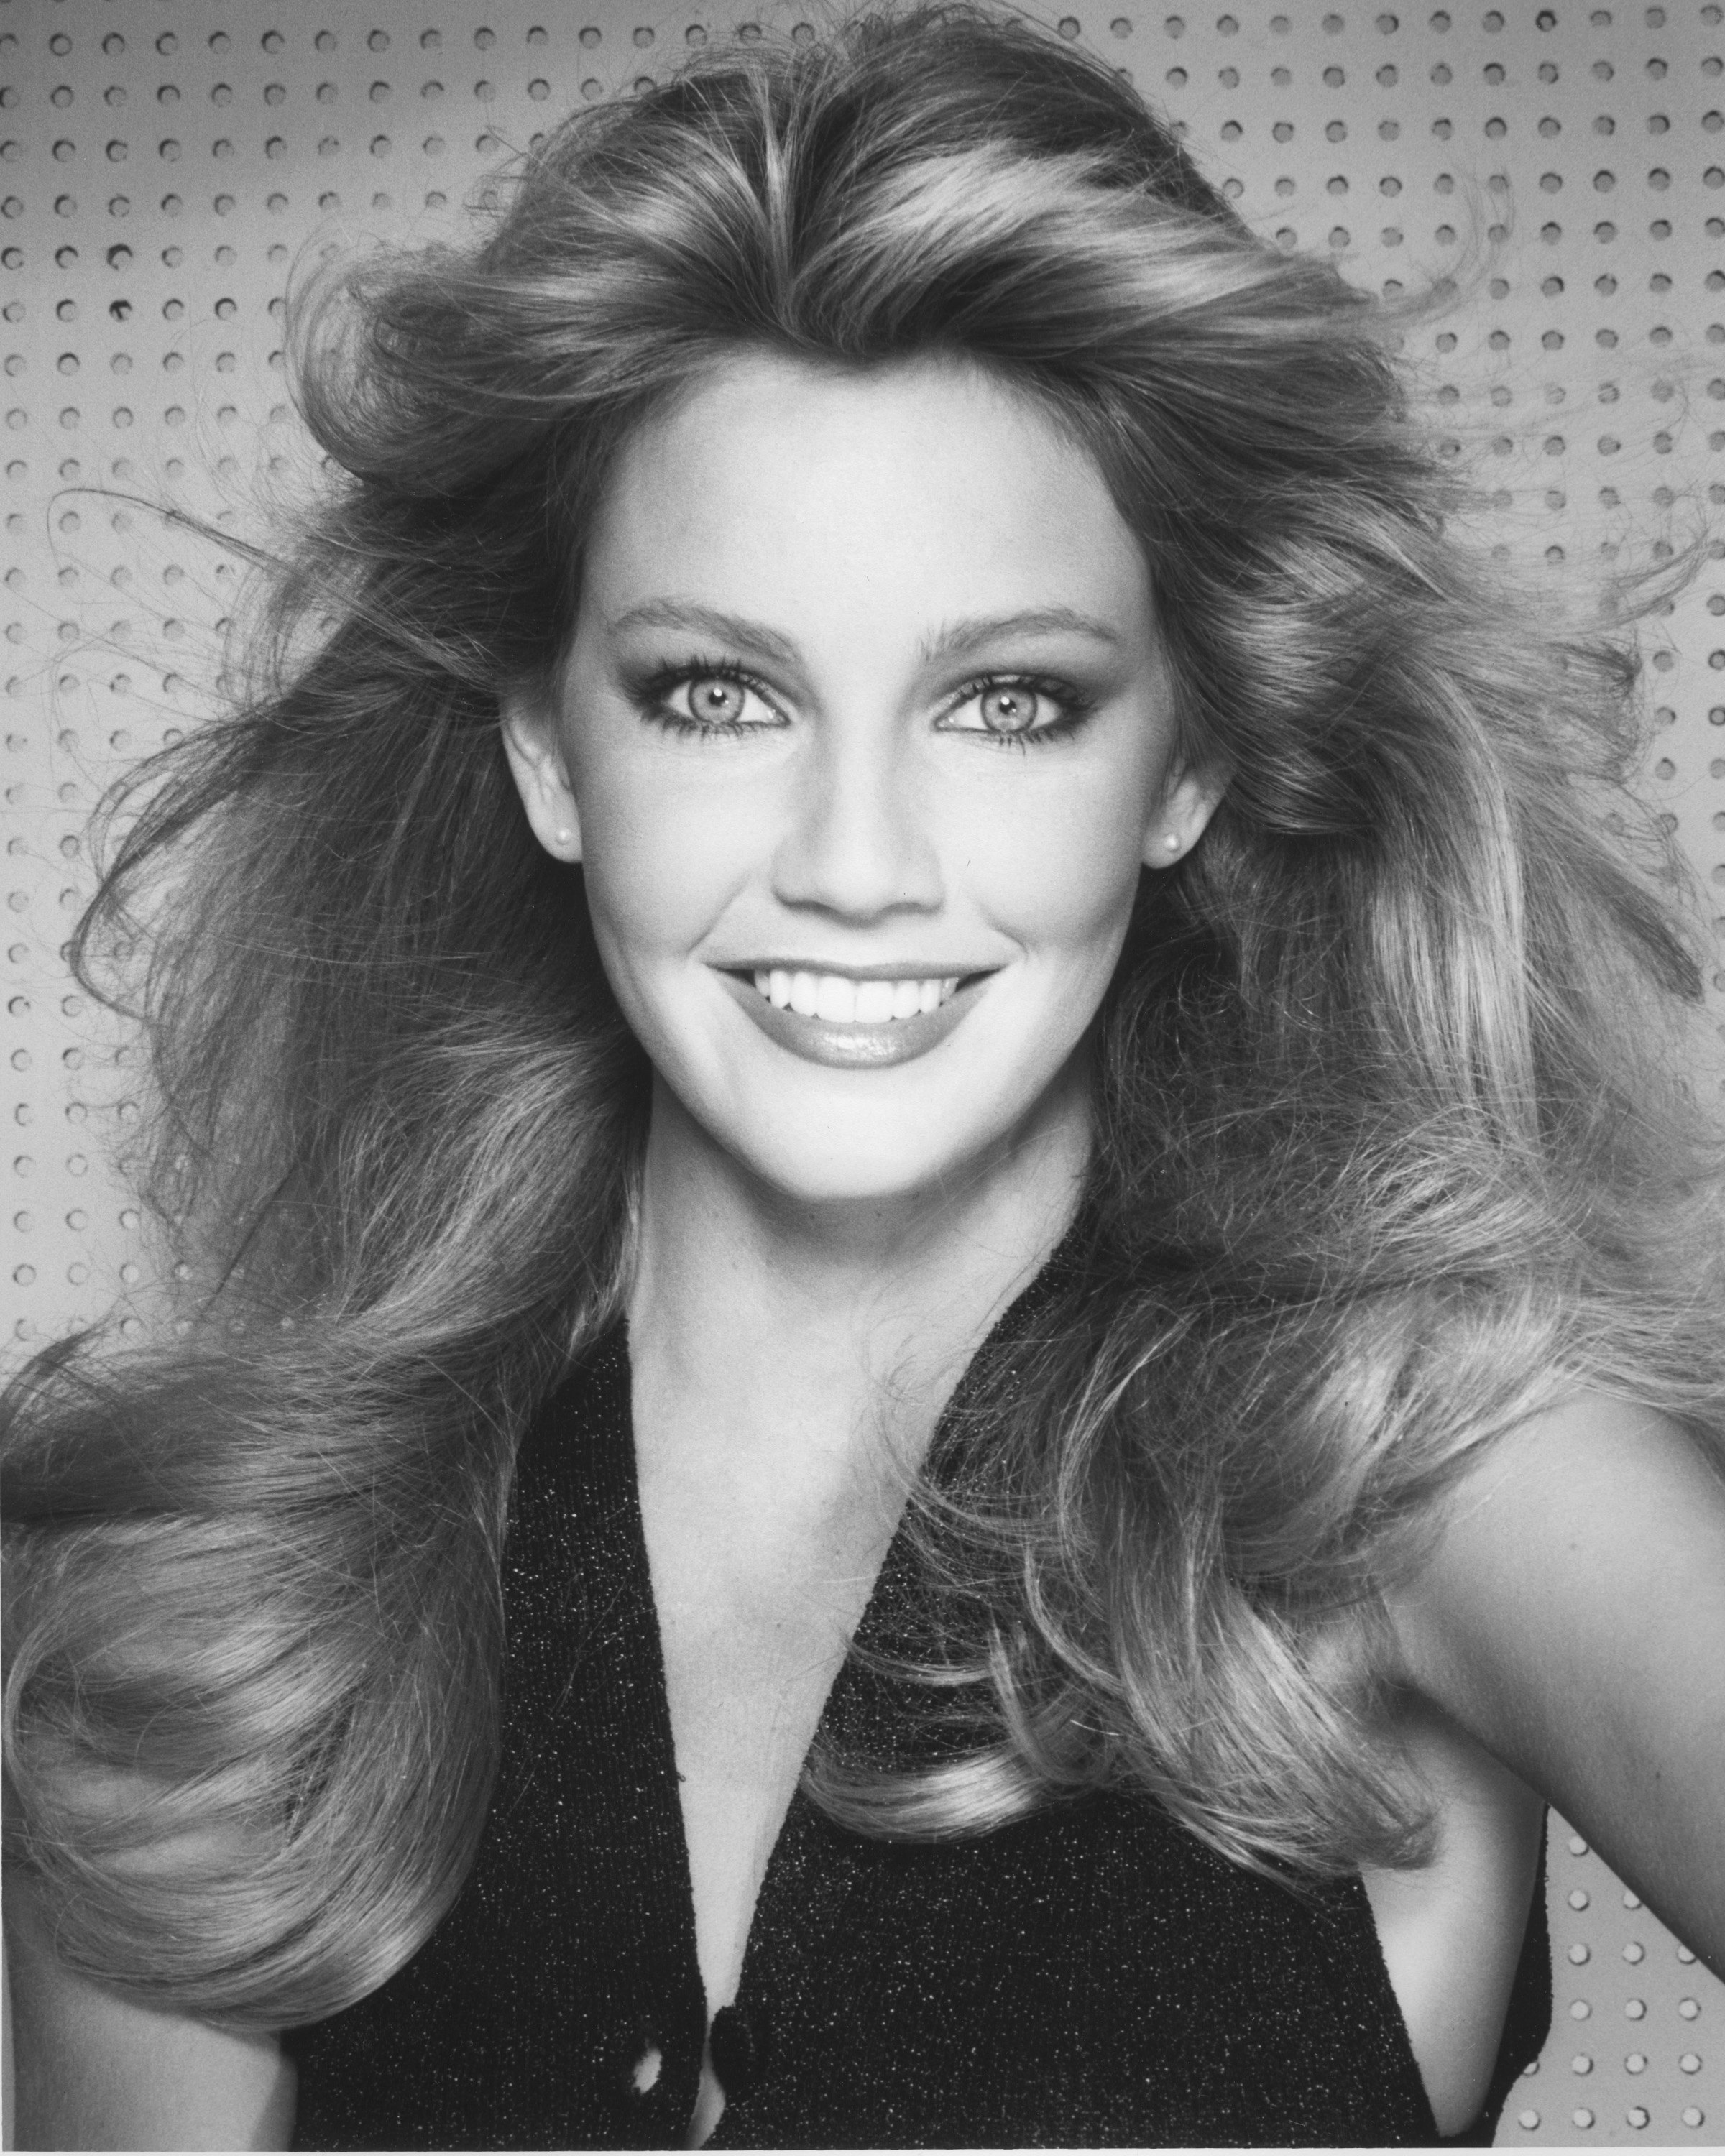 Heather Locklear poses for a Fashion/portrait Session on February 2, 1981